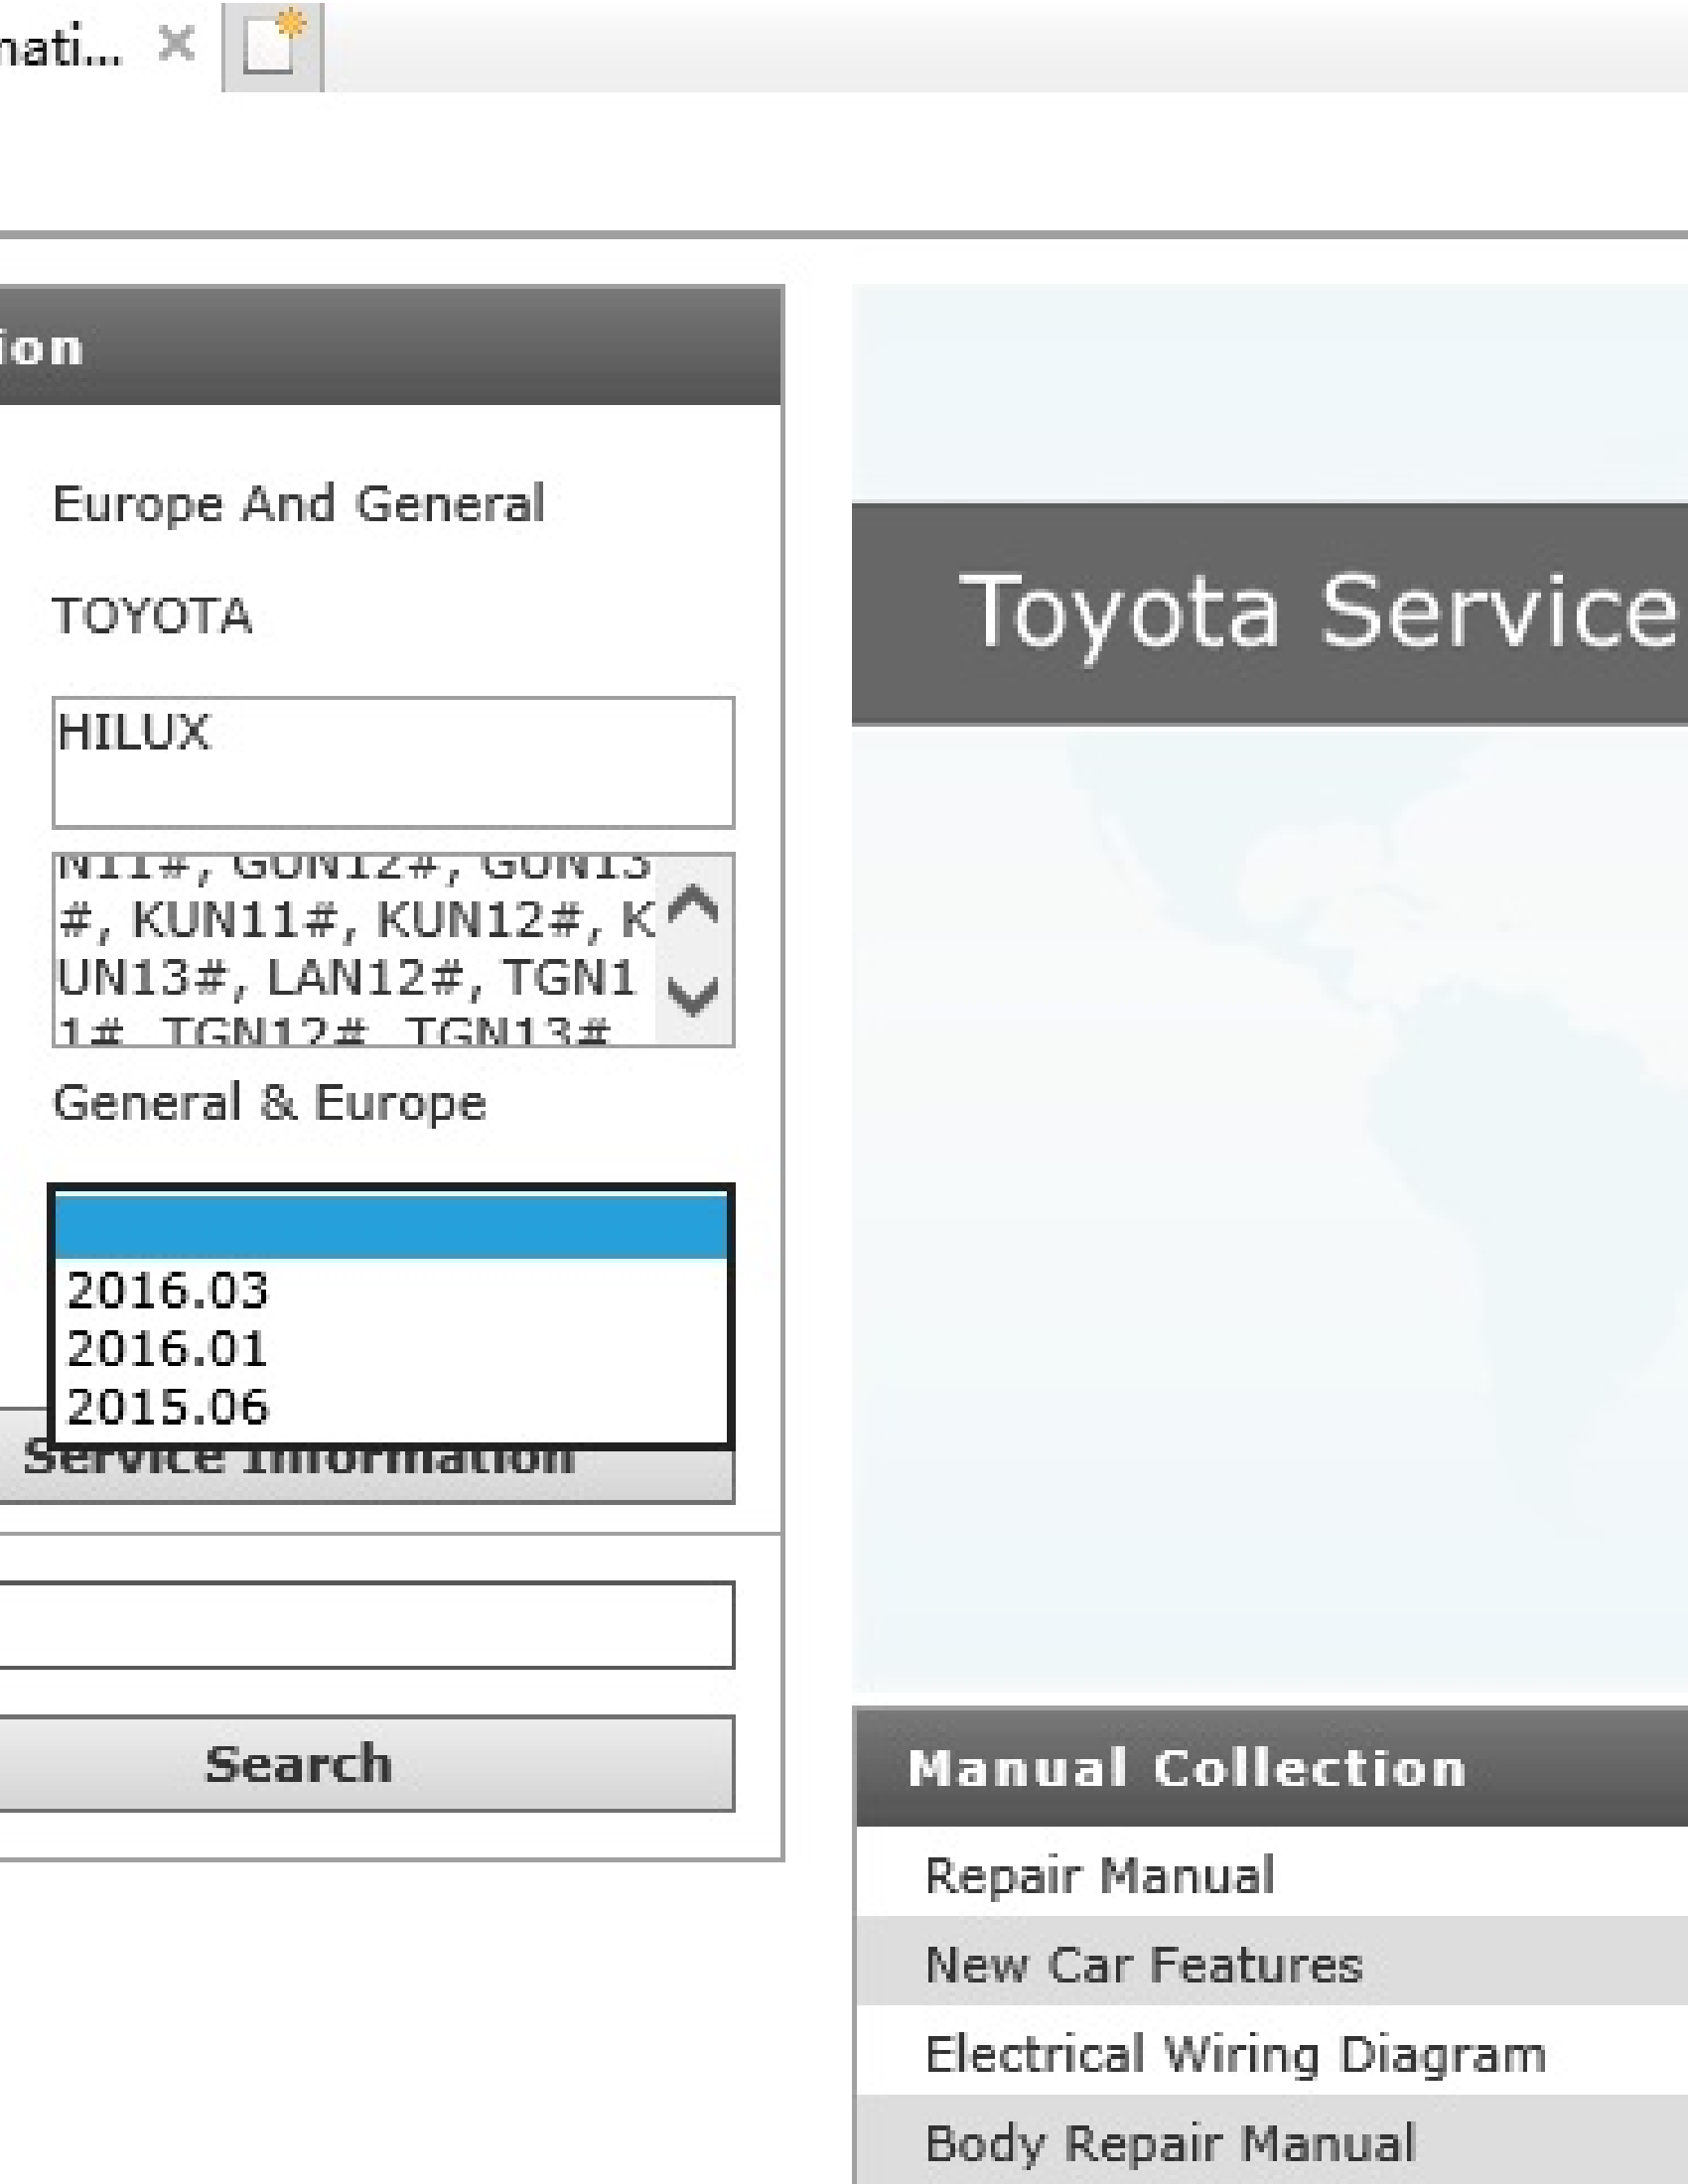 Toyota (GGN12# HILUX manual